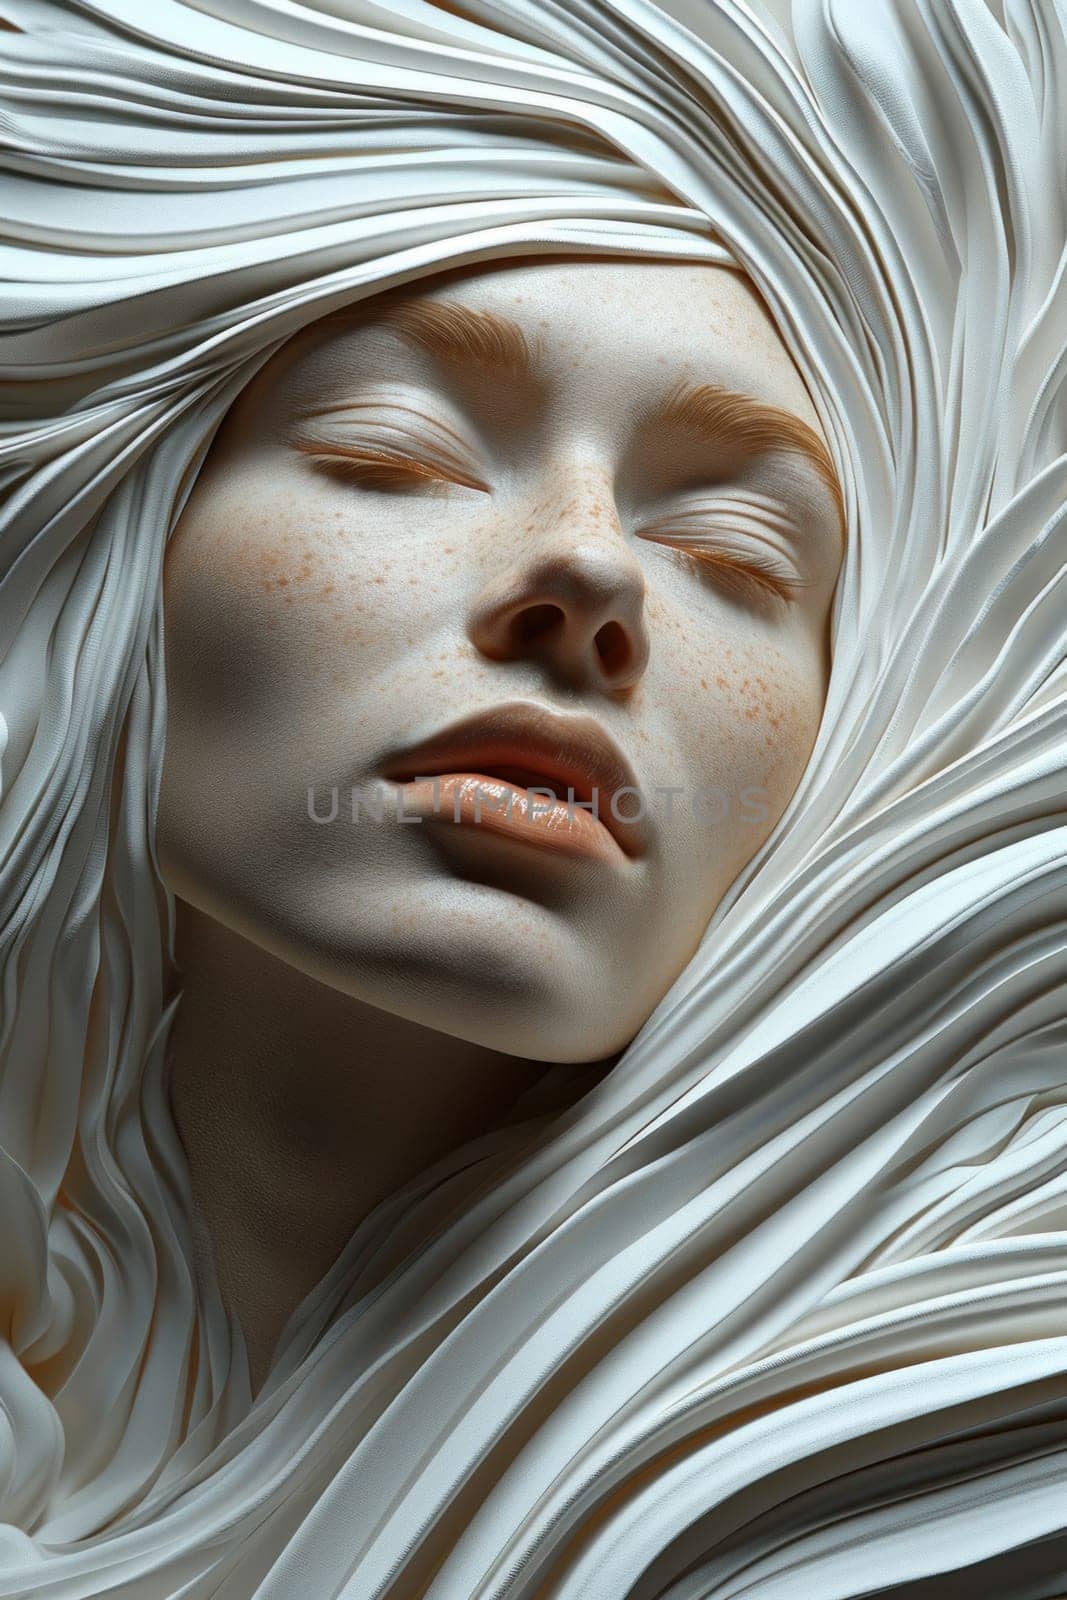 A close up of a woman with her eyes closed and hair wrapped around her face, AI by starush